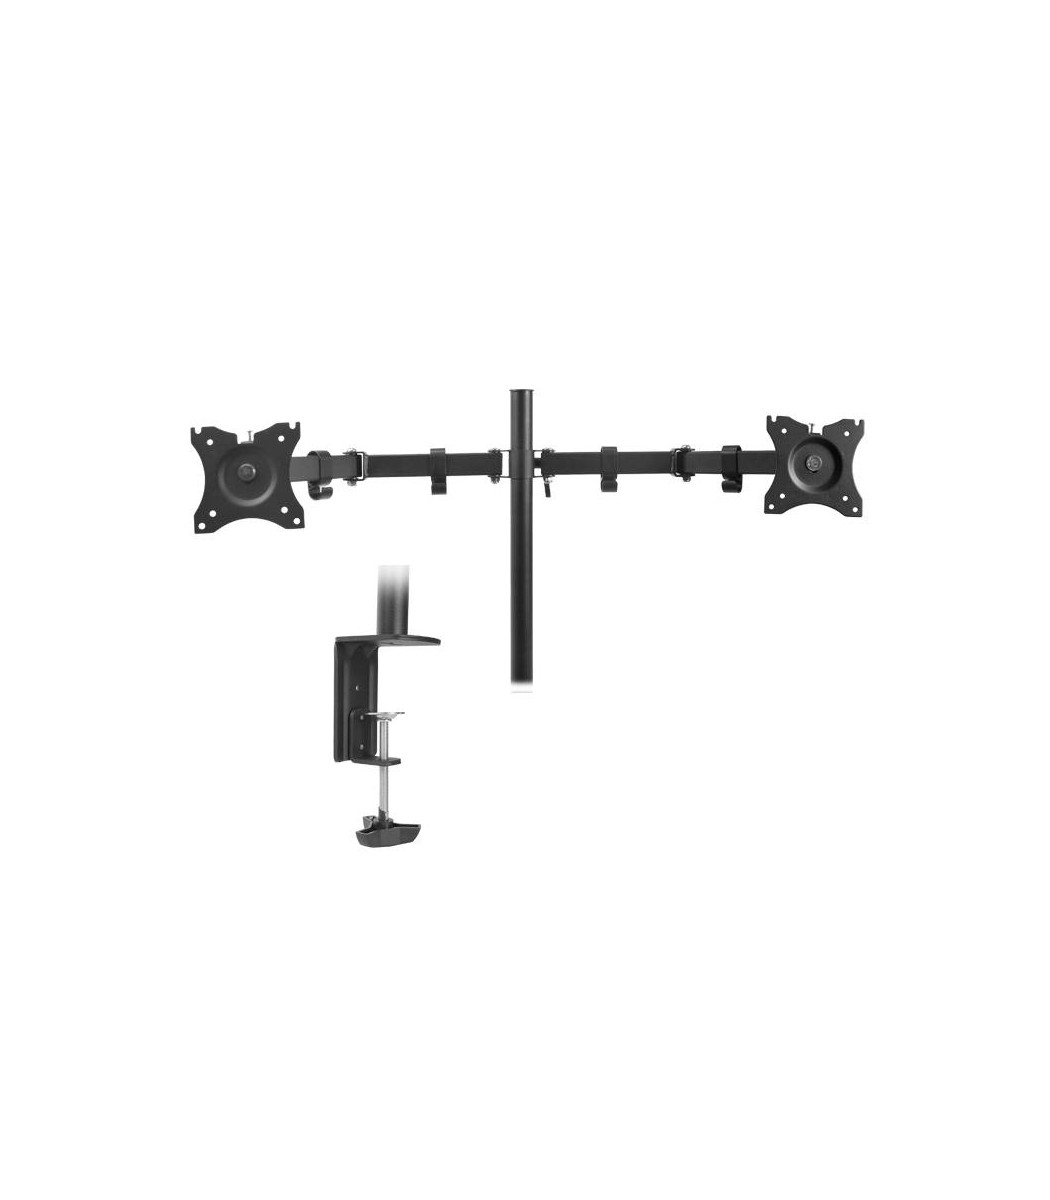 Rotary desk mount for two 10-29" LED LCD monitors.